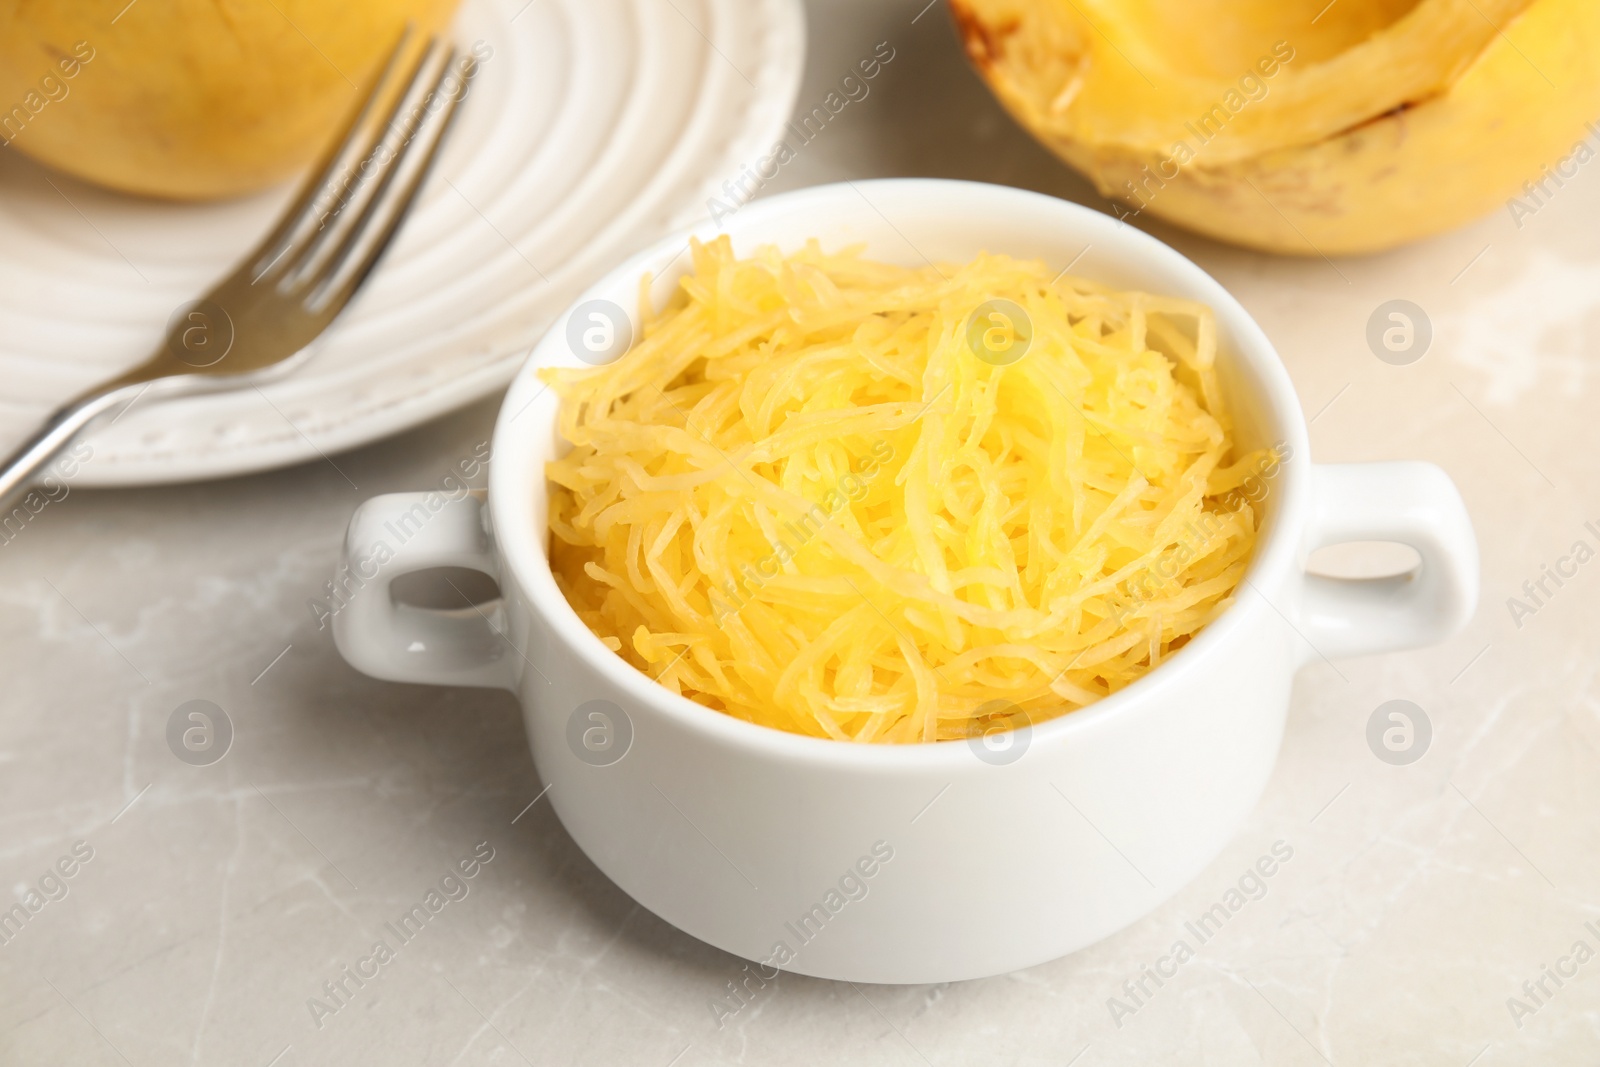 Photo of Cooked spaghetti squash in bowl served on table